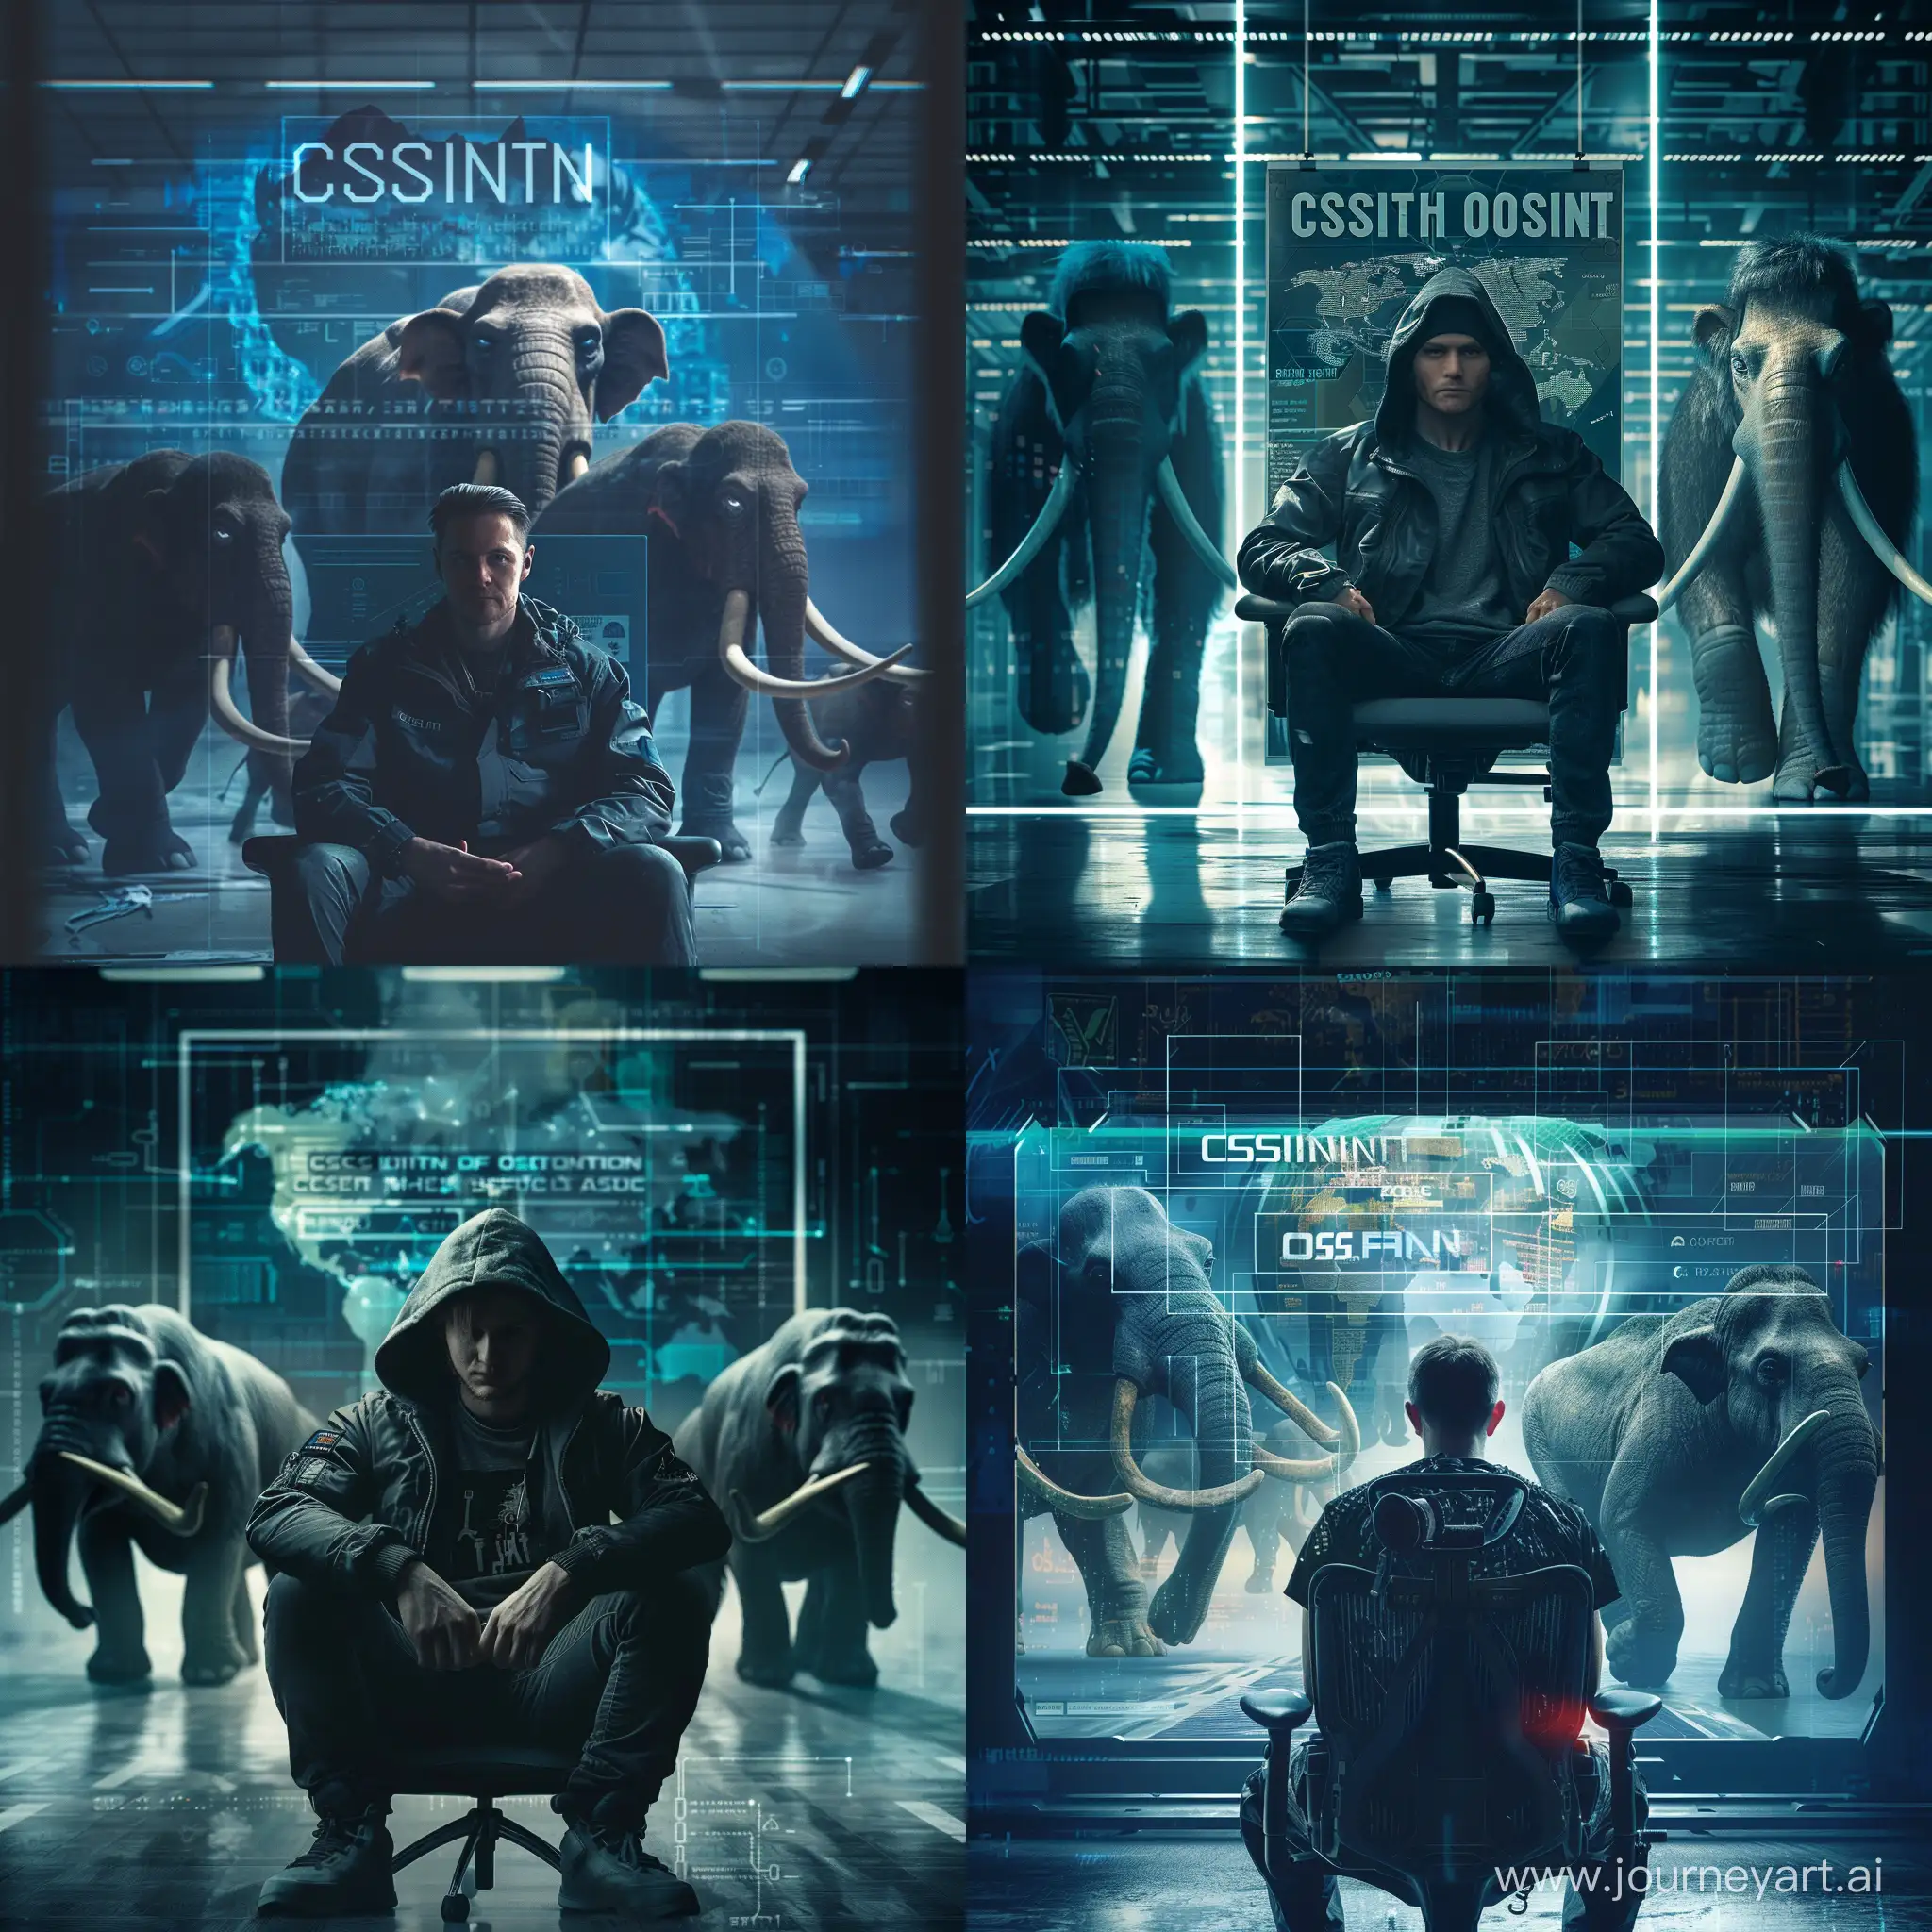 Cyberpunk-Hacker-Surrounded-by-Mammoths-with-CSINT-and-OSINT-Posters